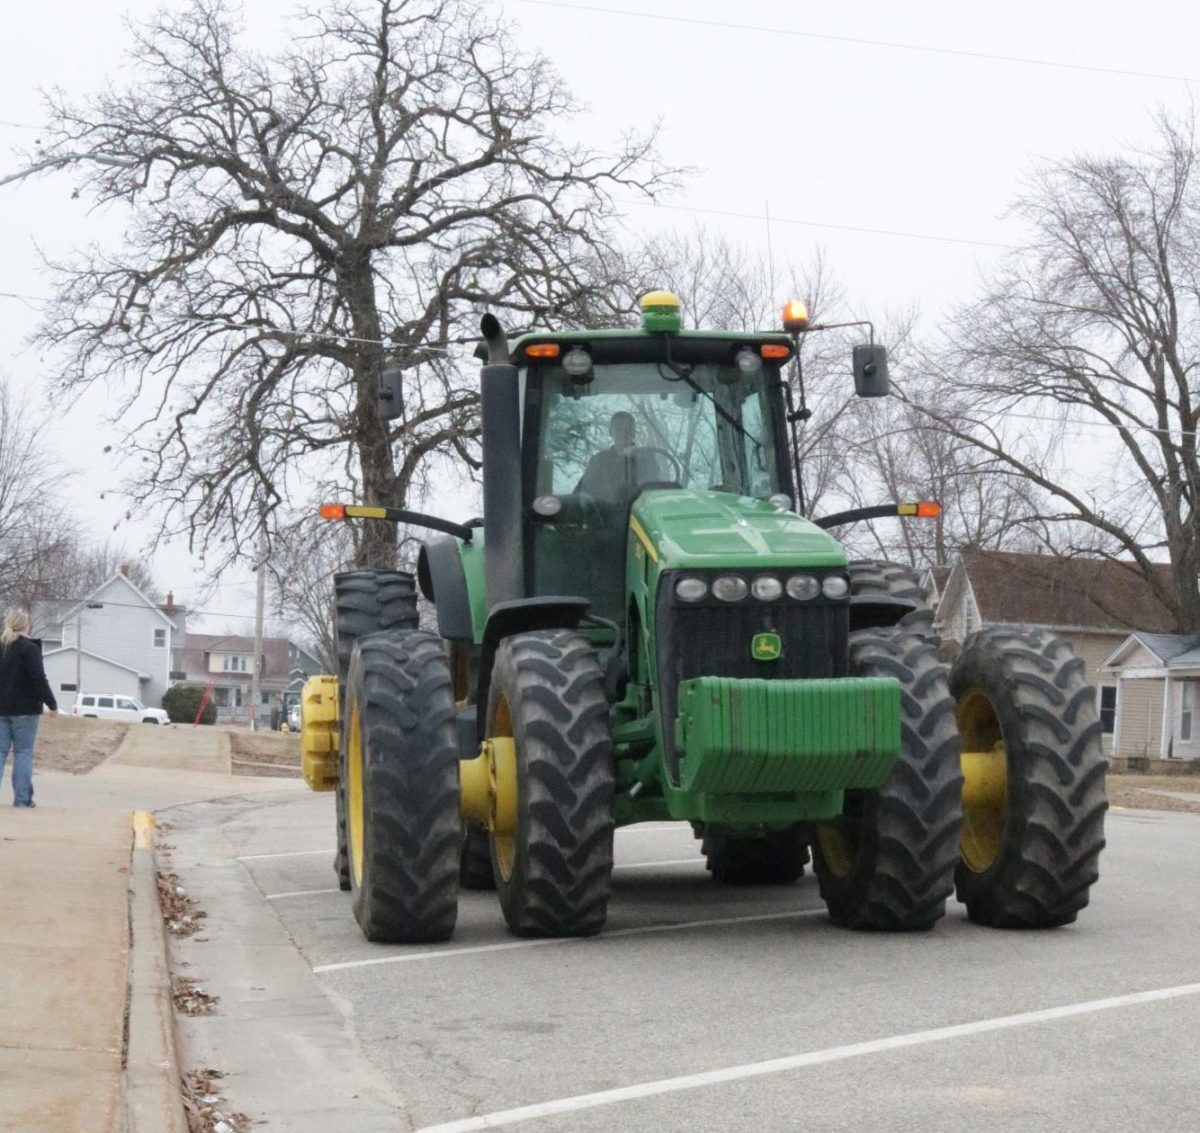 An+FFA+member+drives+his+John+Deere+tractor+to+school.+Students+watched+his+tractor+as+he+pulled+in.+